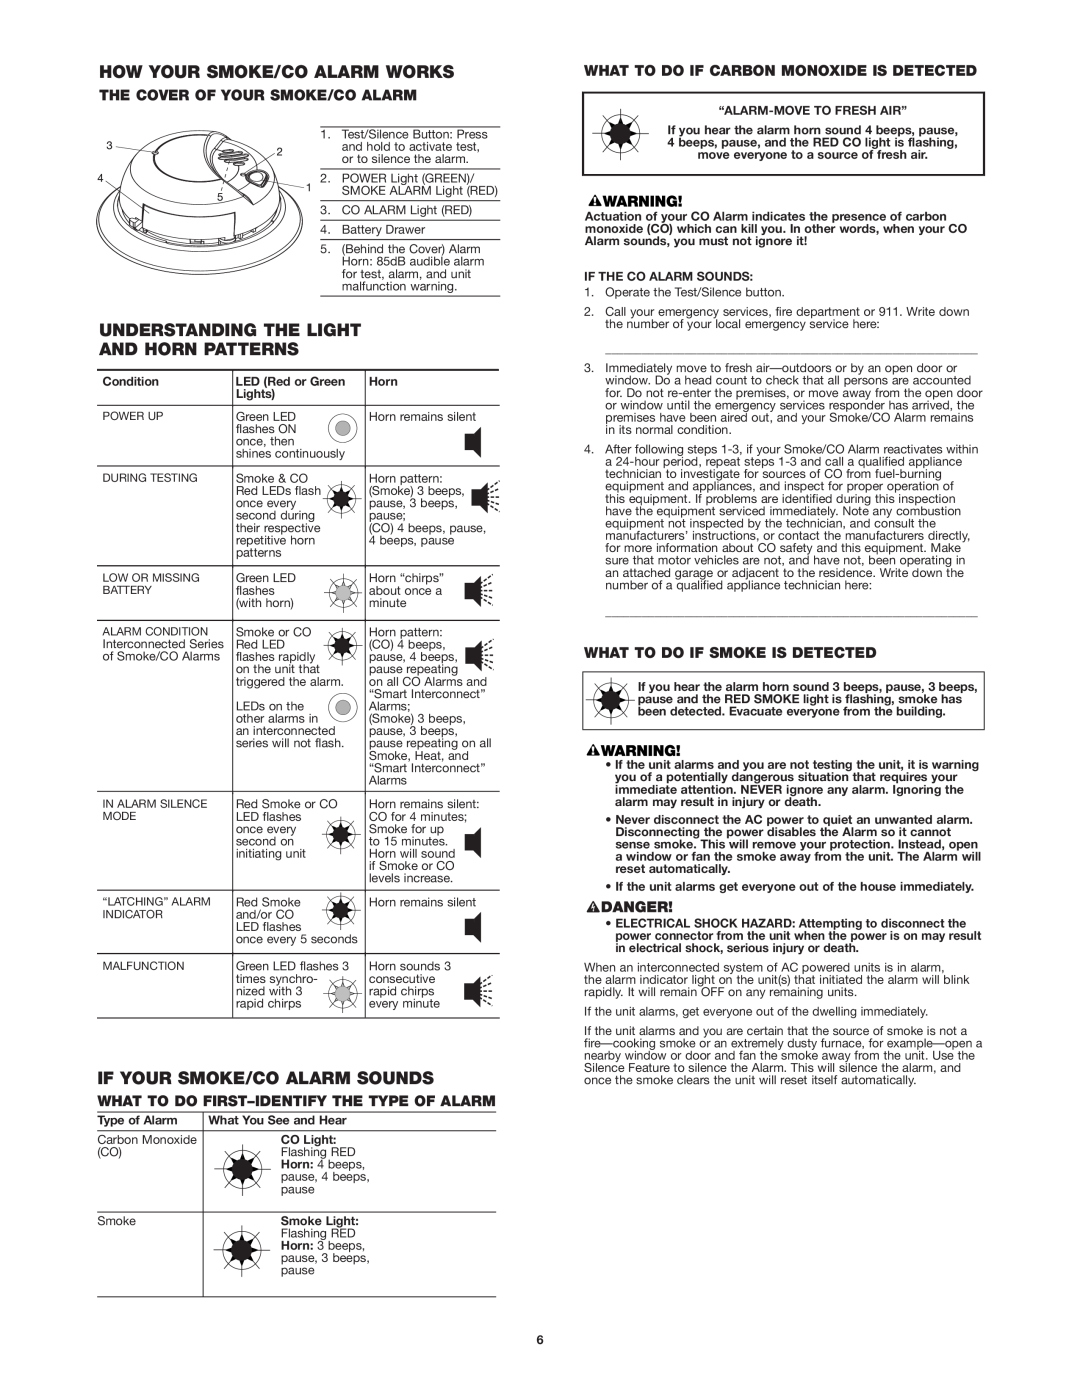 First Alert SC9120B user manual How Your Smoke/Co Alarm Works, Understanding The Light And Horn Patterns 